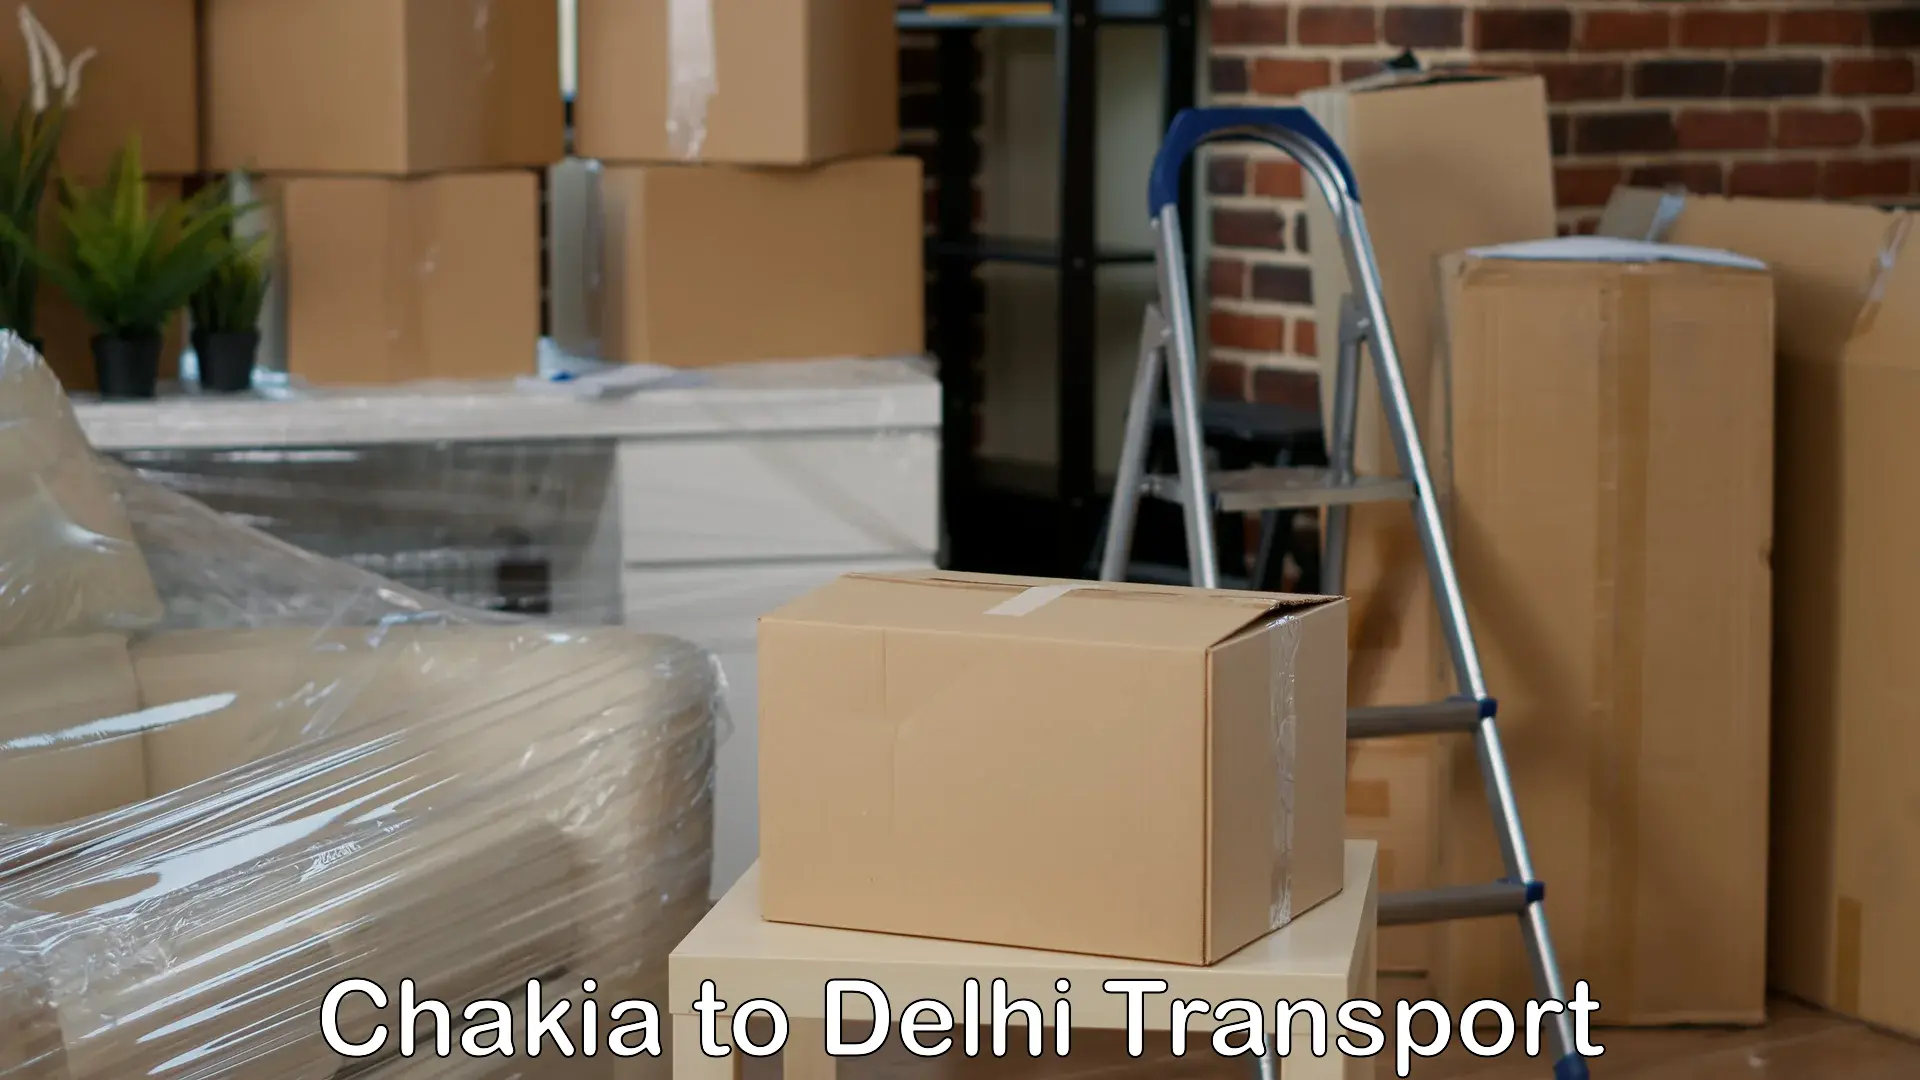 Transport shared services Chakia to NCR